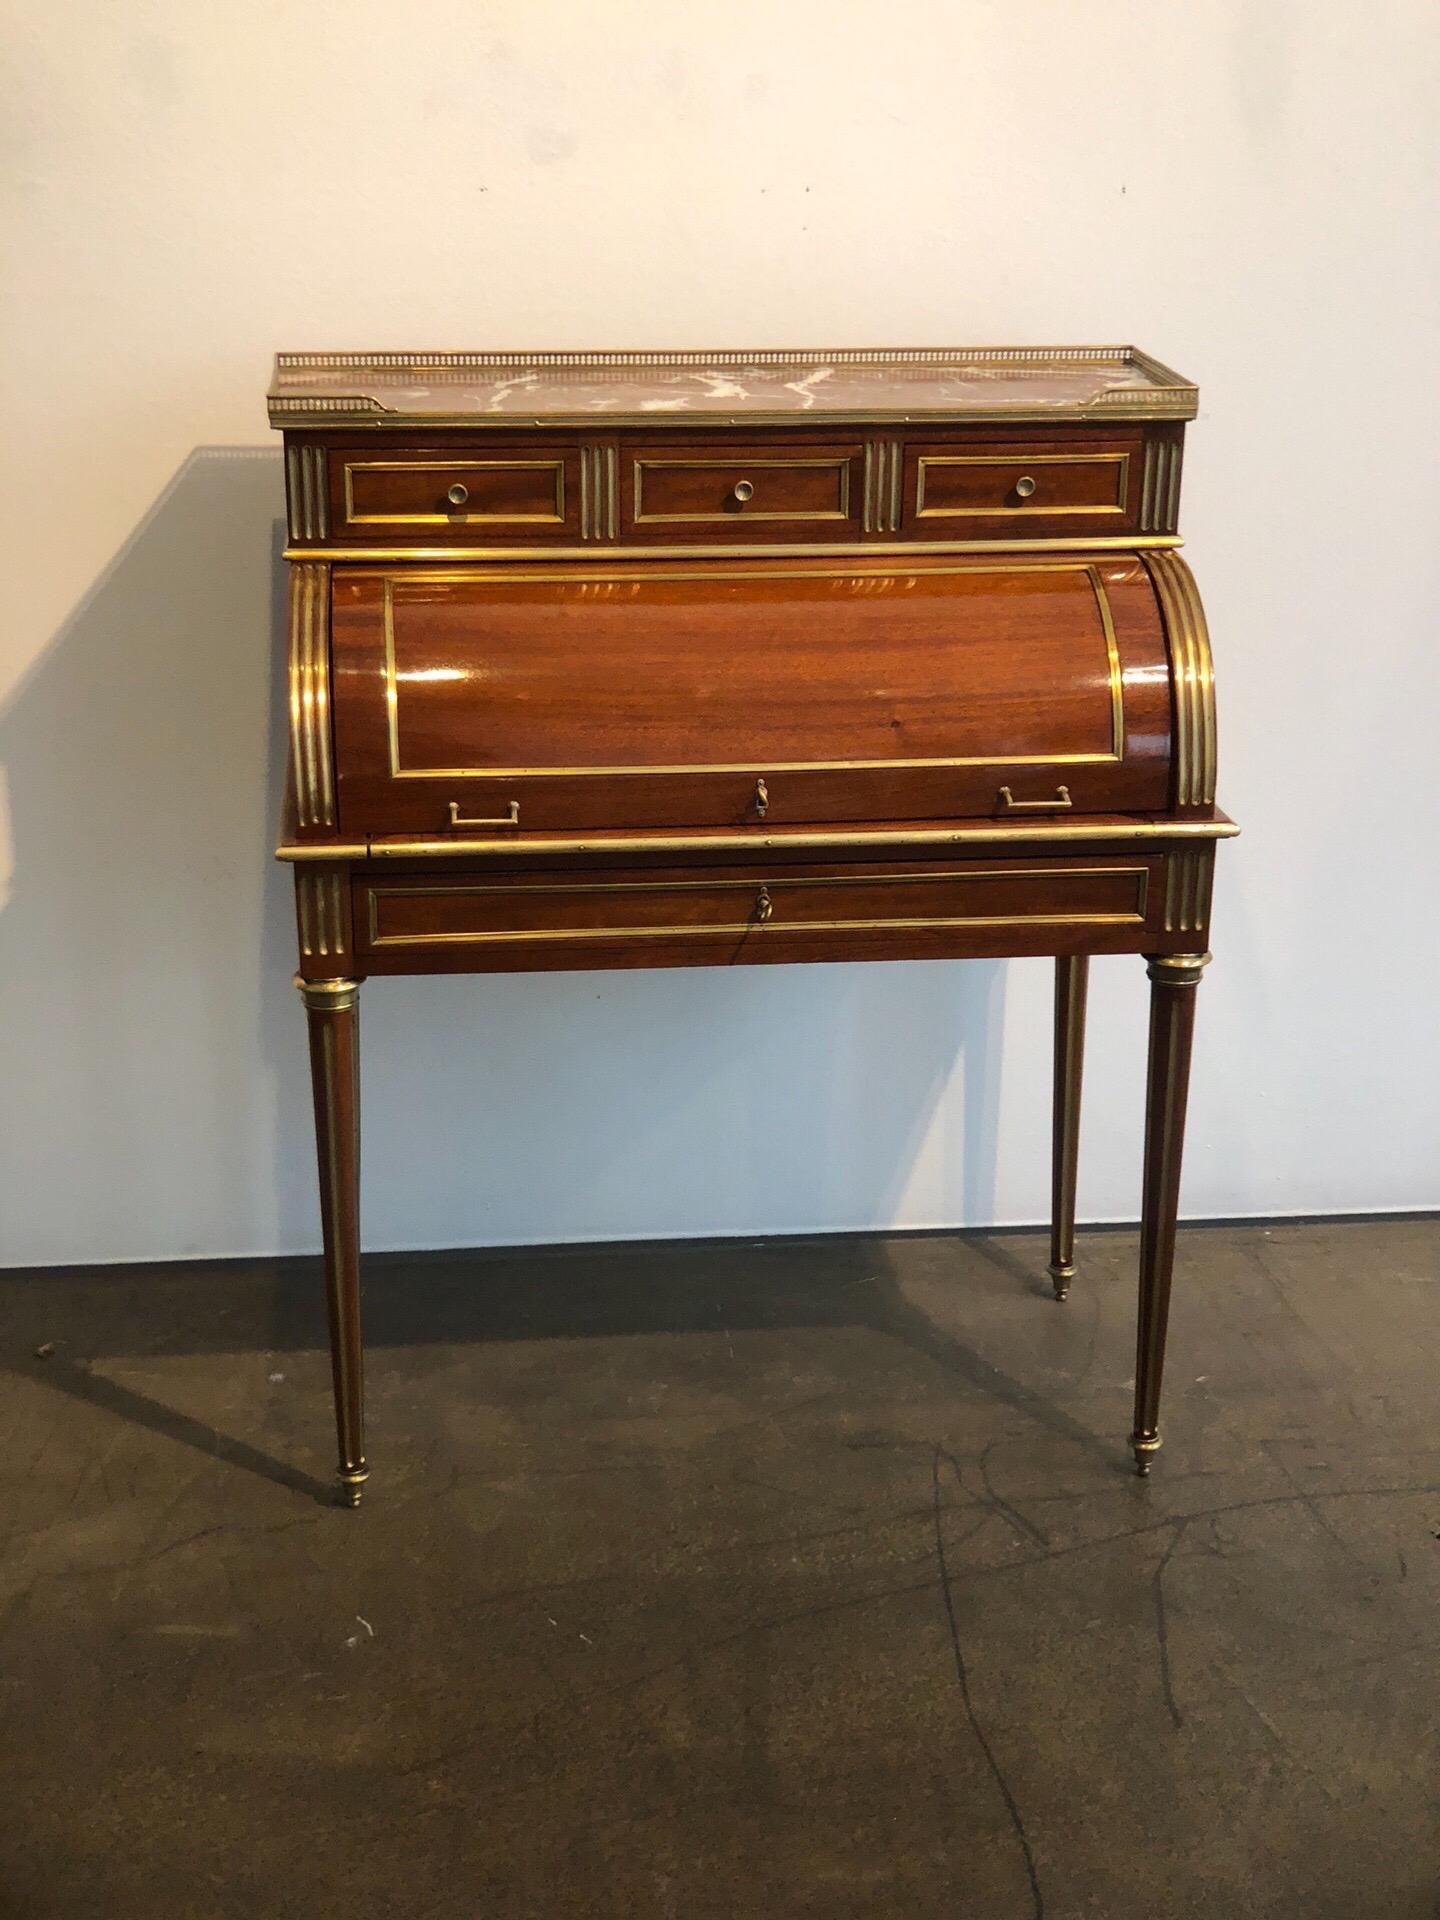 Very elegant antique French Louis XVI style cylinder writing desk from the 19th century. The excellent craftsmanship and high-grade materials, such as polished brass, polished mahogany, leather, and marble, underlines the beauty of this